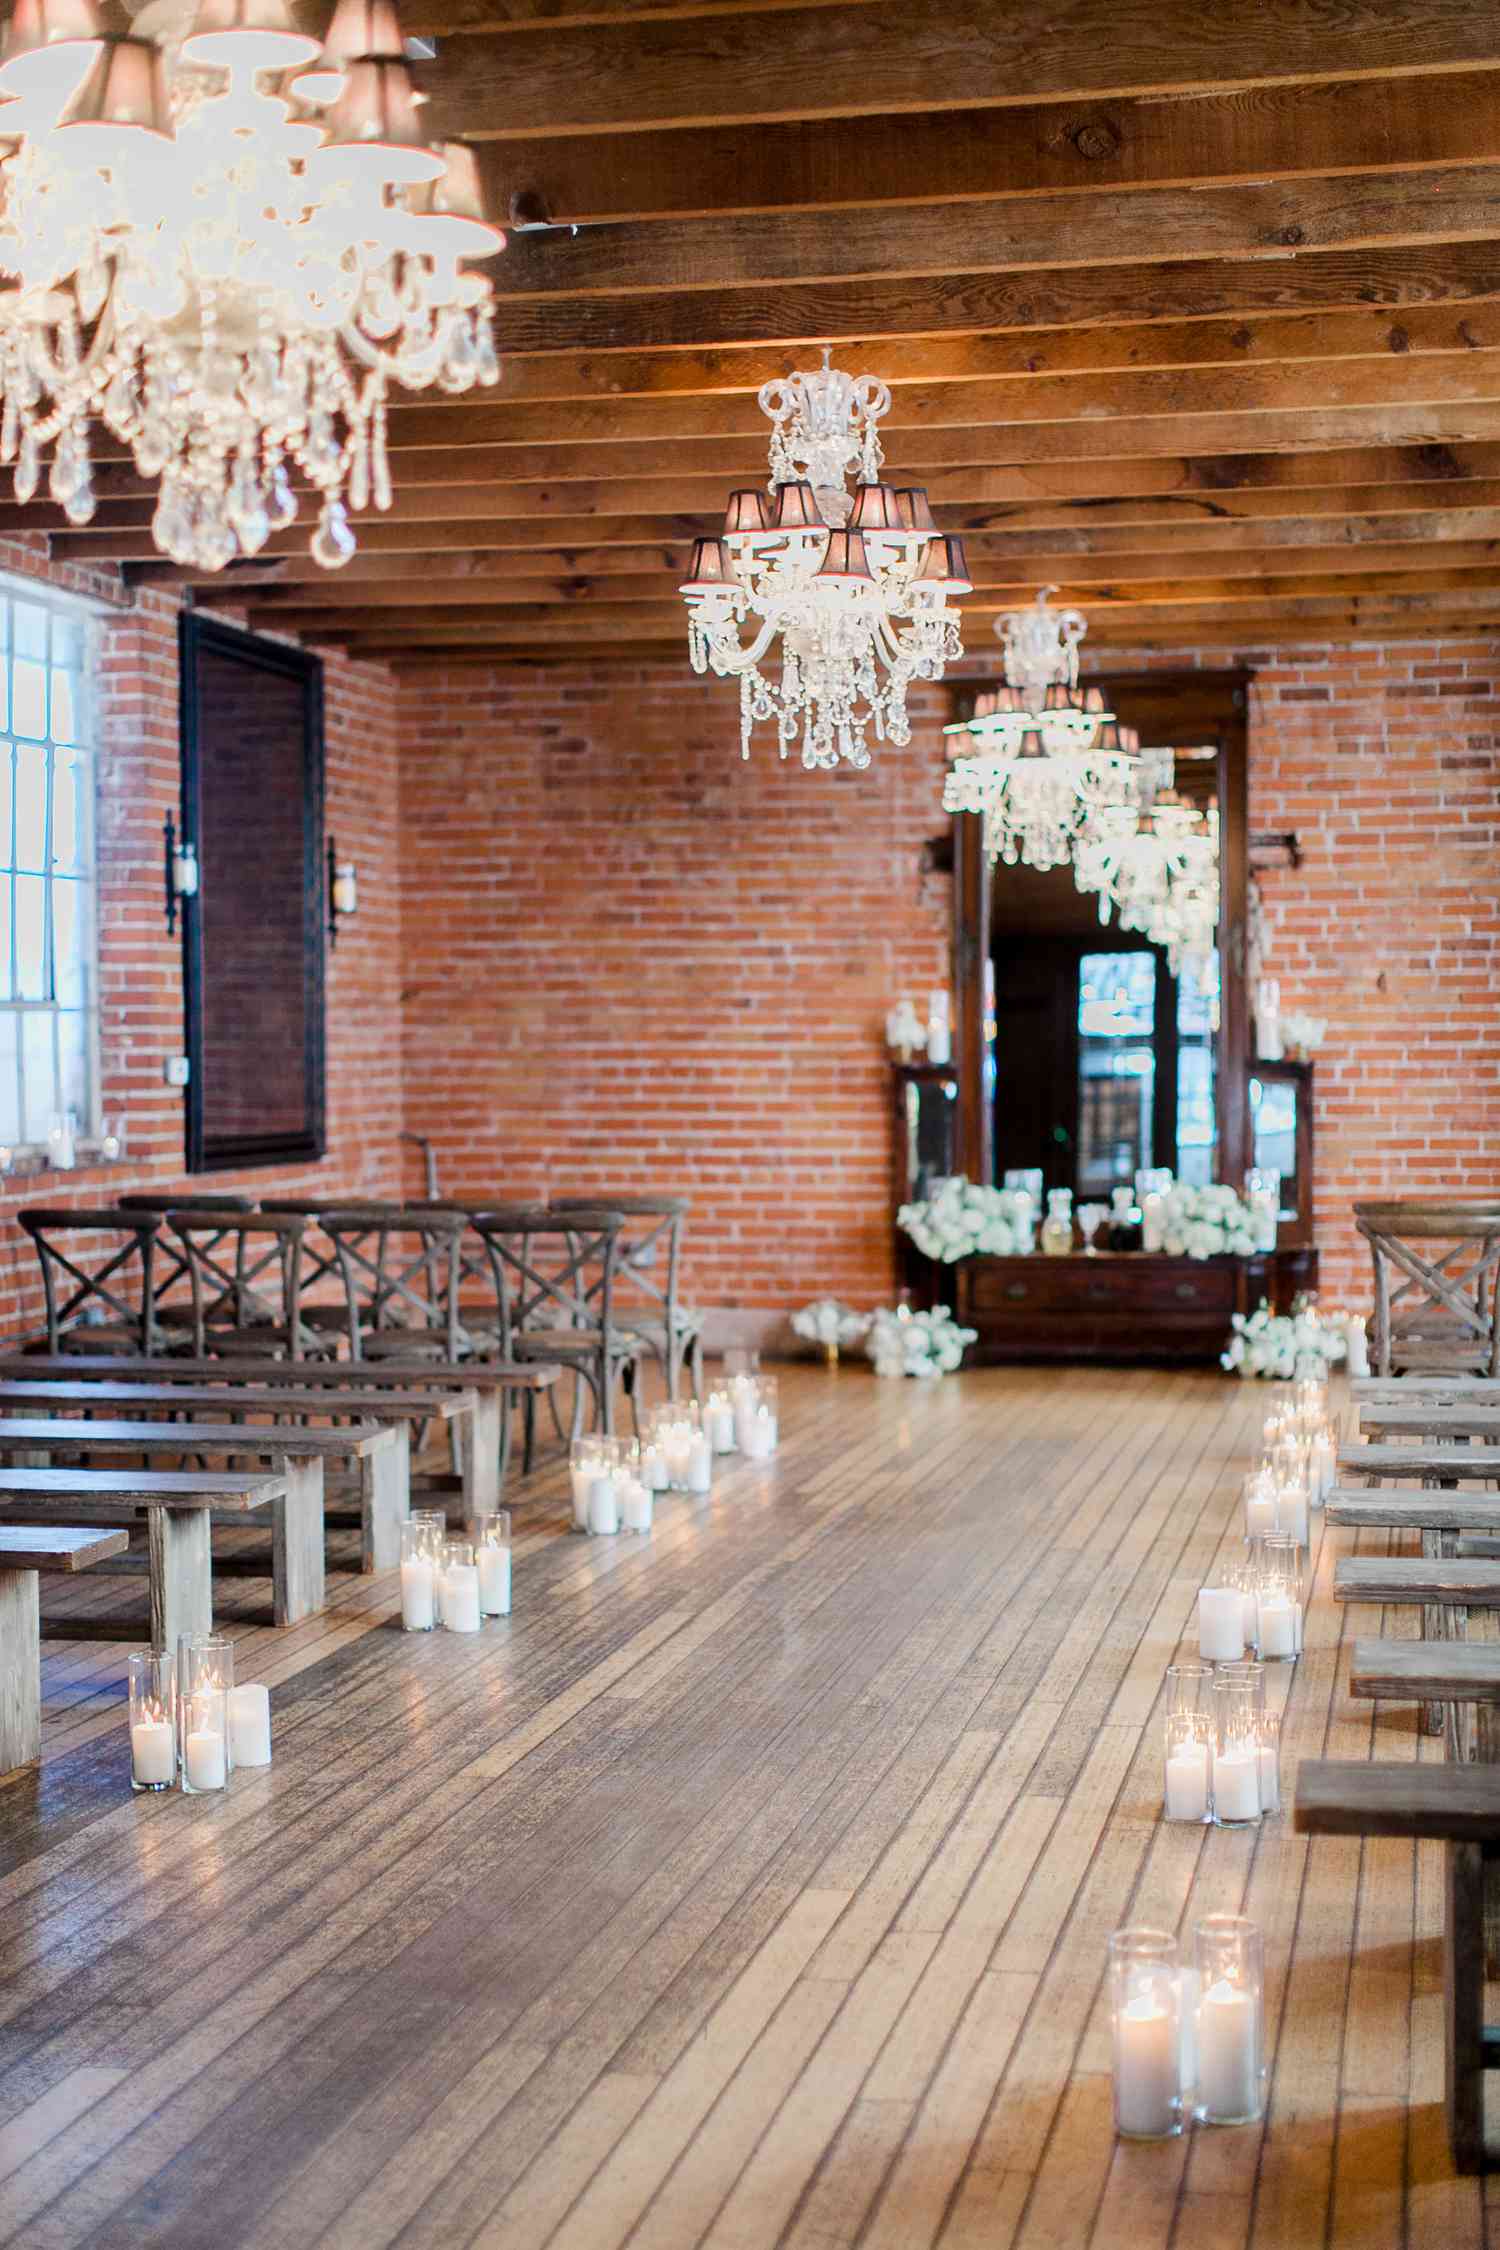 Candle-lined ceremony aisle with wooden floors and ceilings and red brick walls